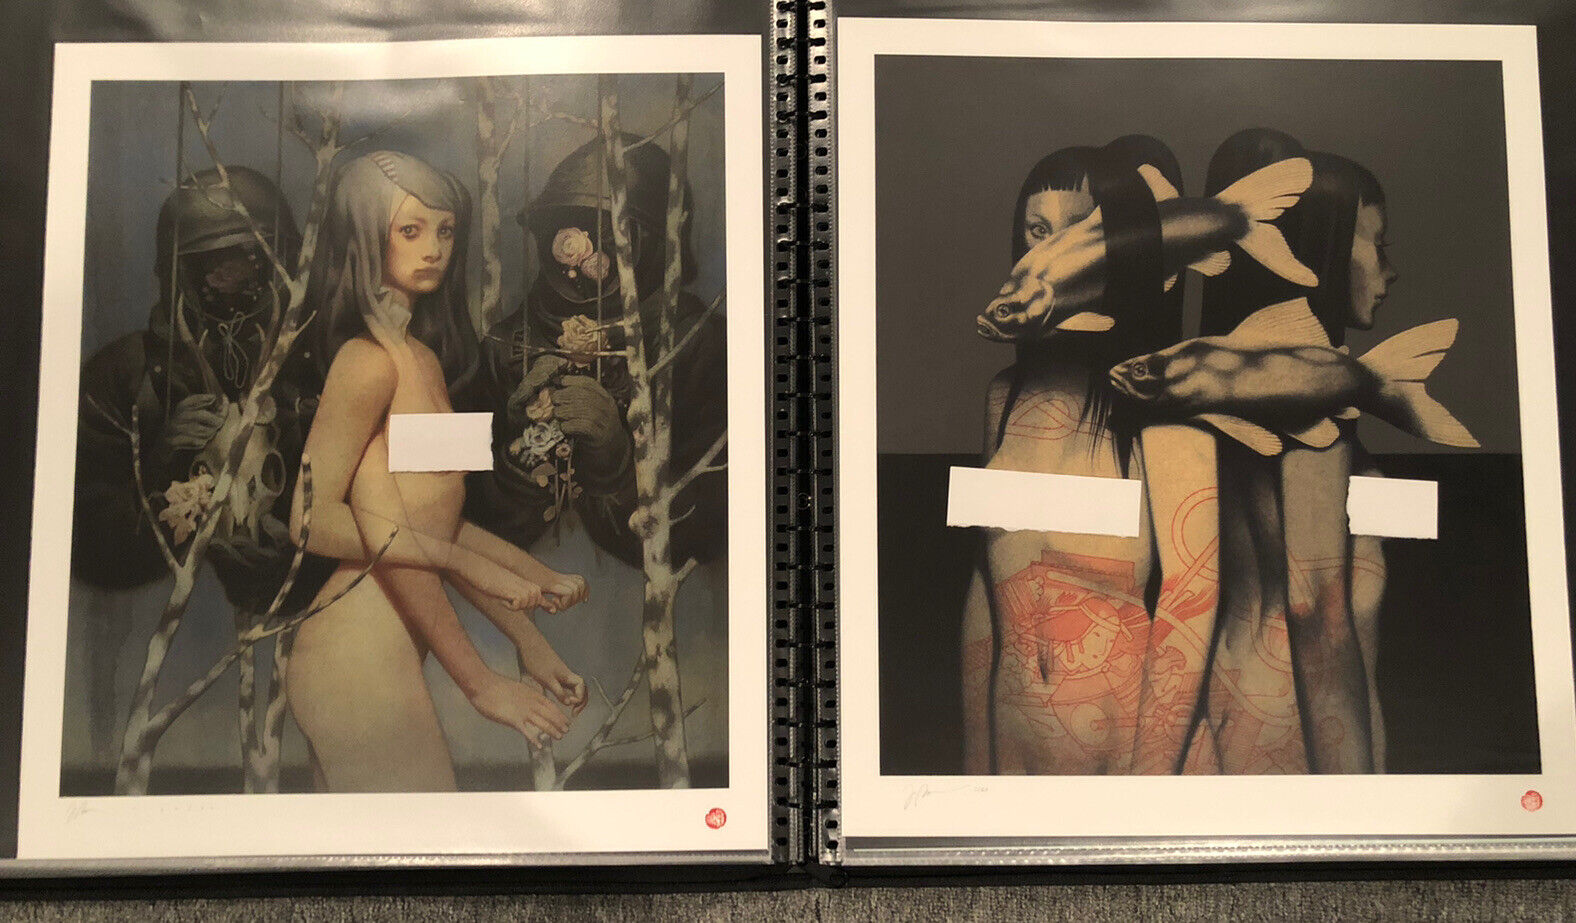 Joao Ruas Echoes and Drowned Signed and Numbered Art Print Poster Knots Exhibit  Без бренда